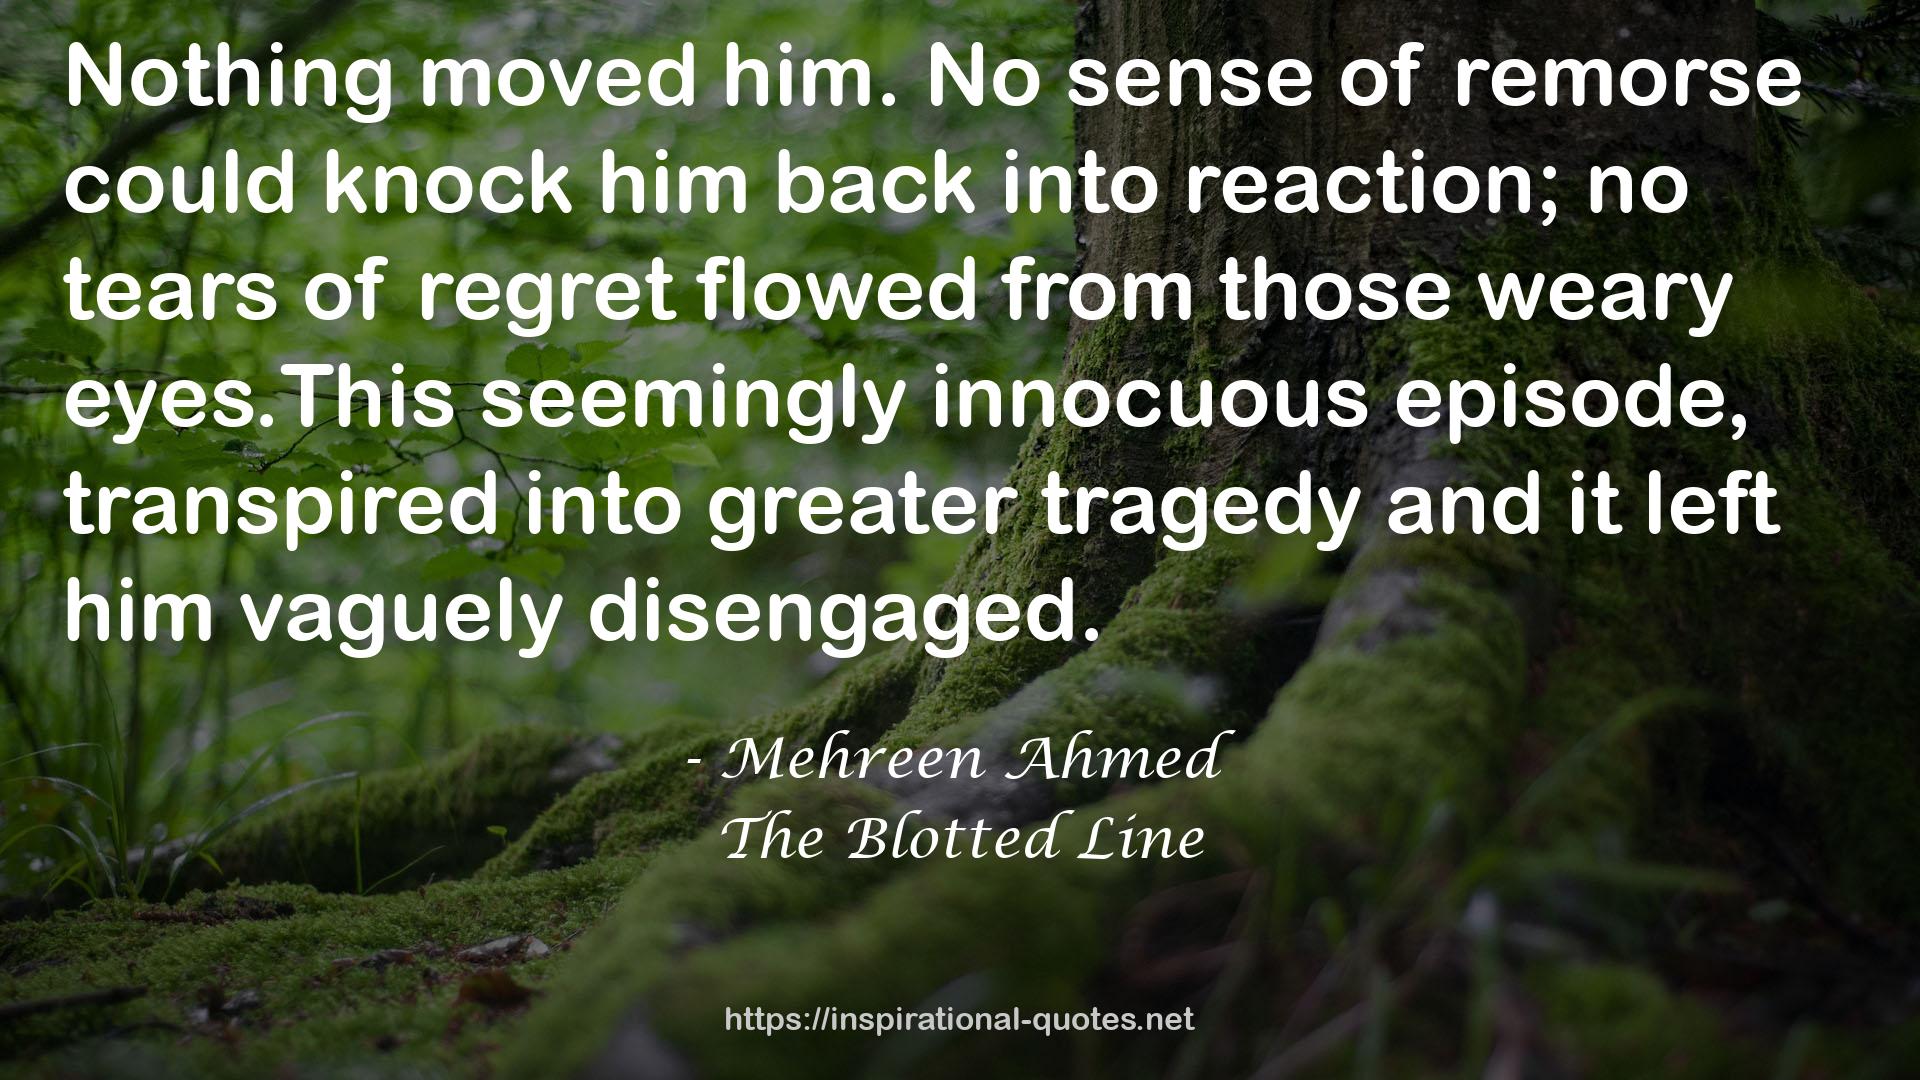 The Blotted Line QUOTES